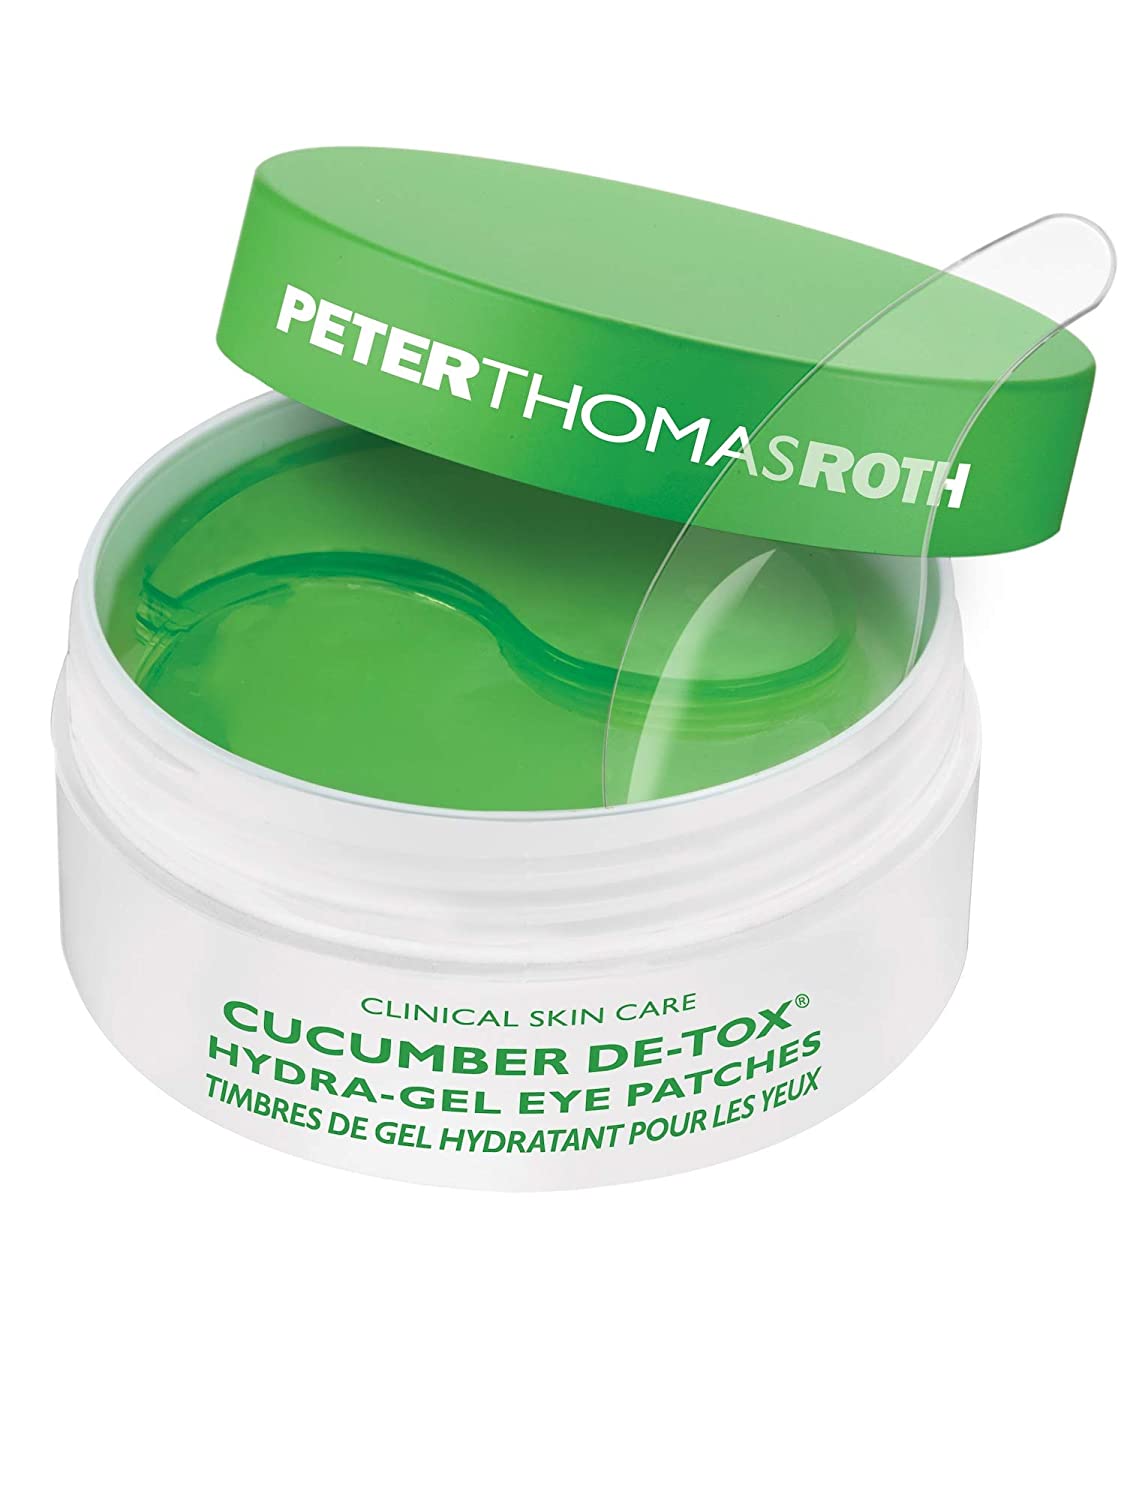 Load image into Gallery viewer, Peter Thomas Roth Cucumber De-Tox Hydra-Gel Eye Patches
